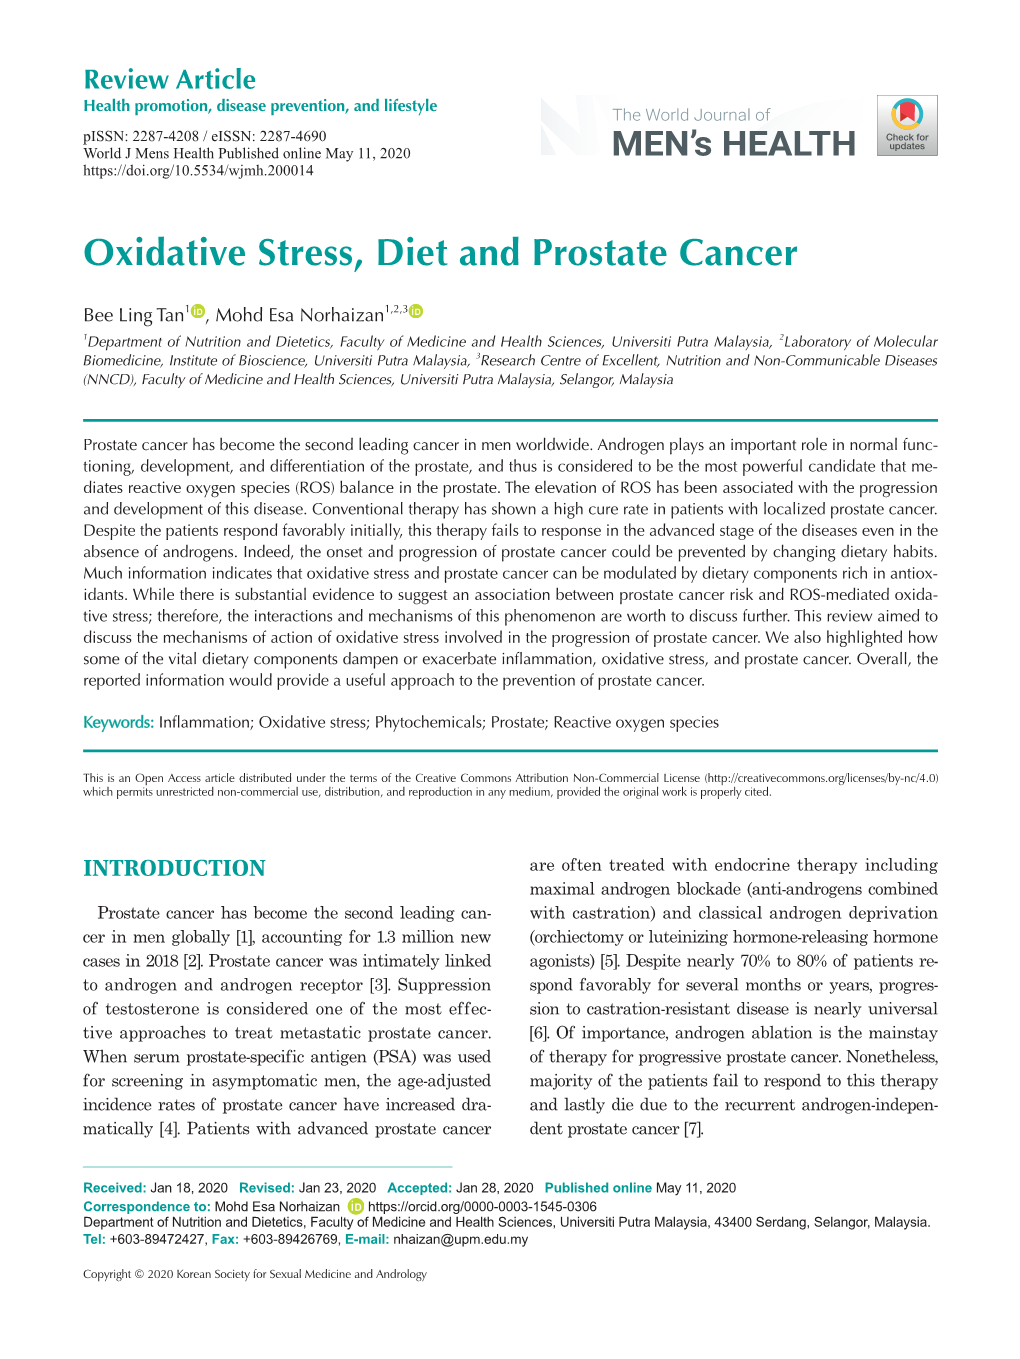 Oxidative Stress, Diet and Prostate Cancer